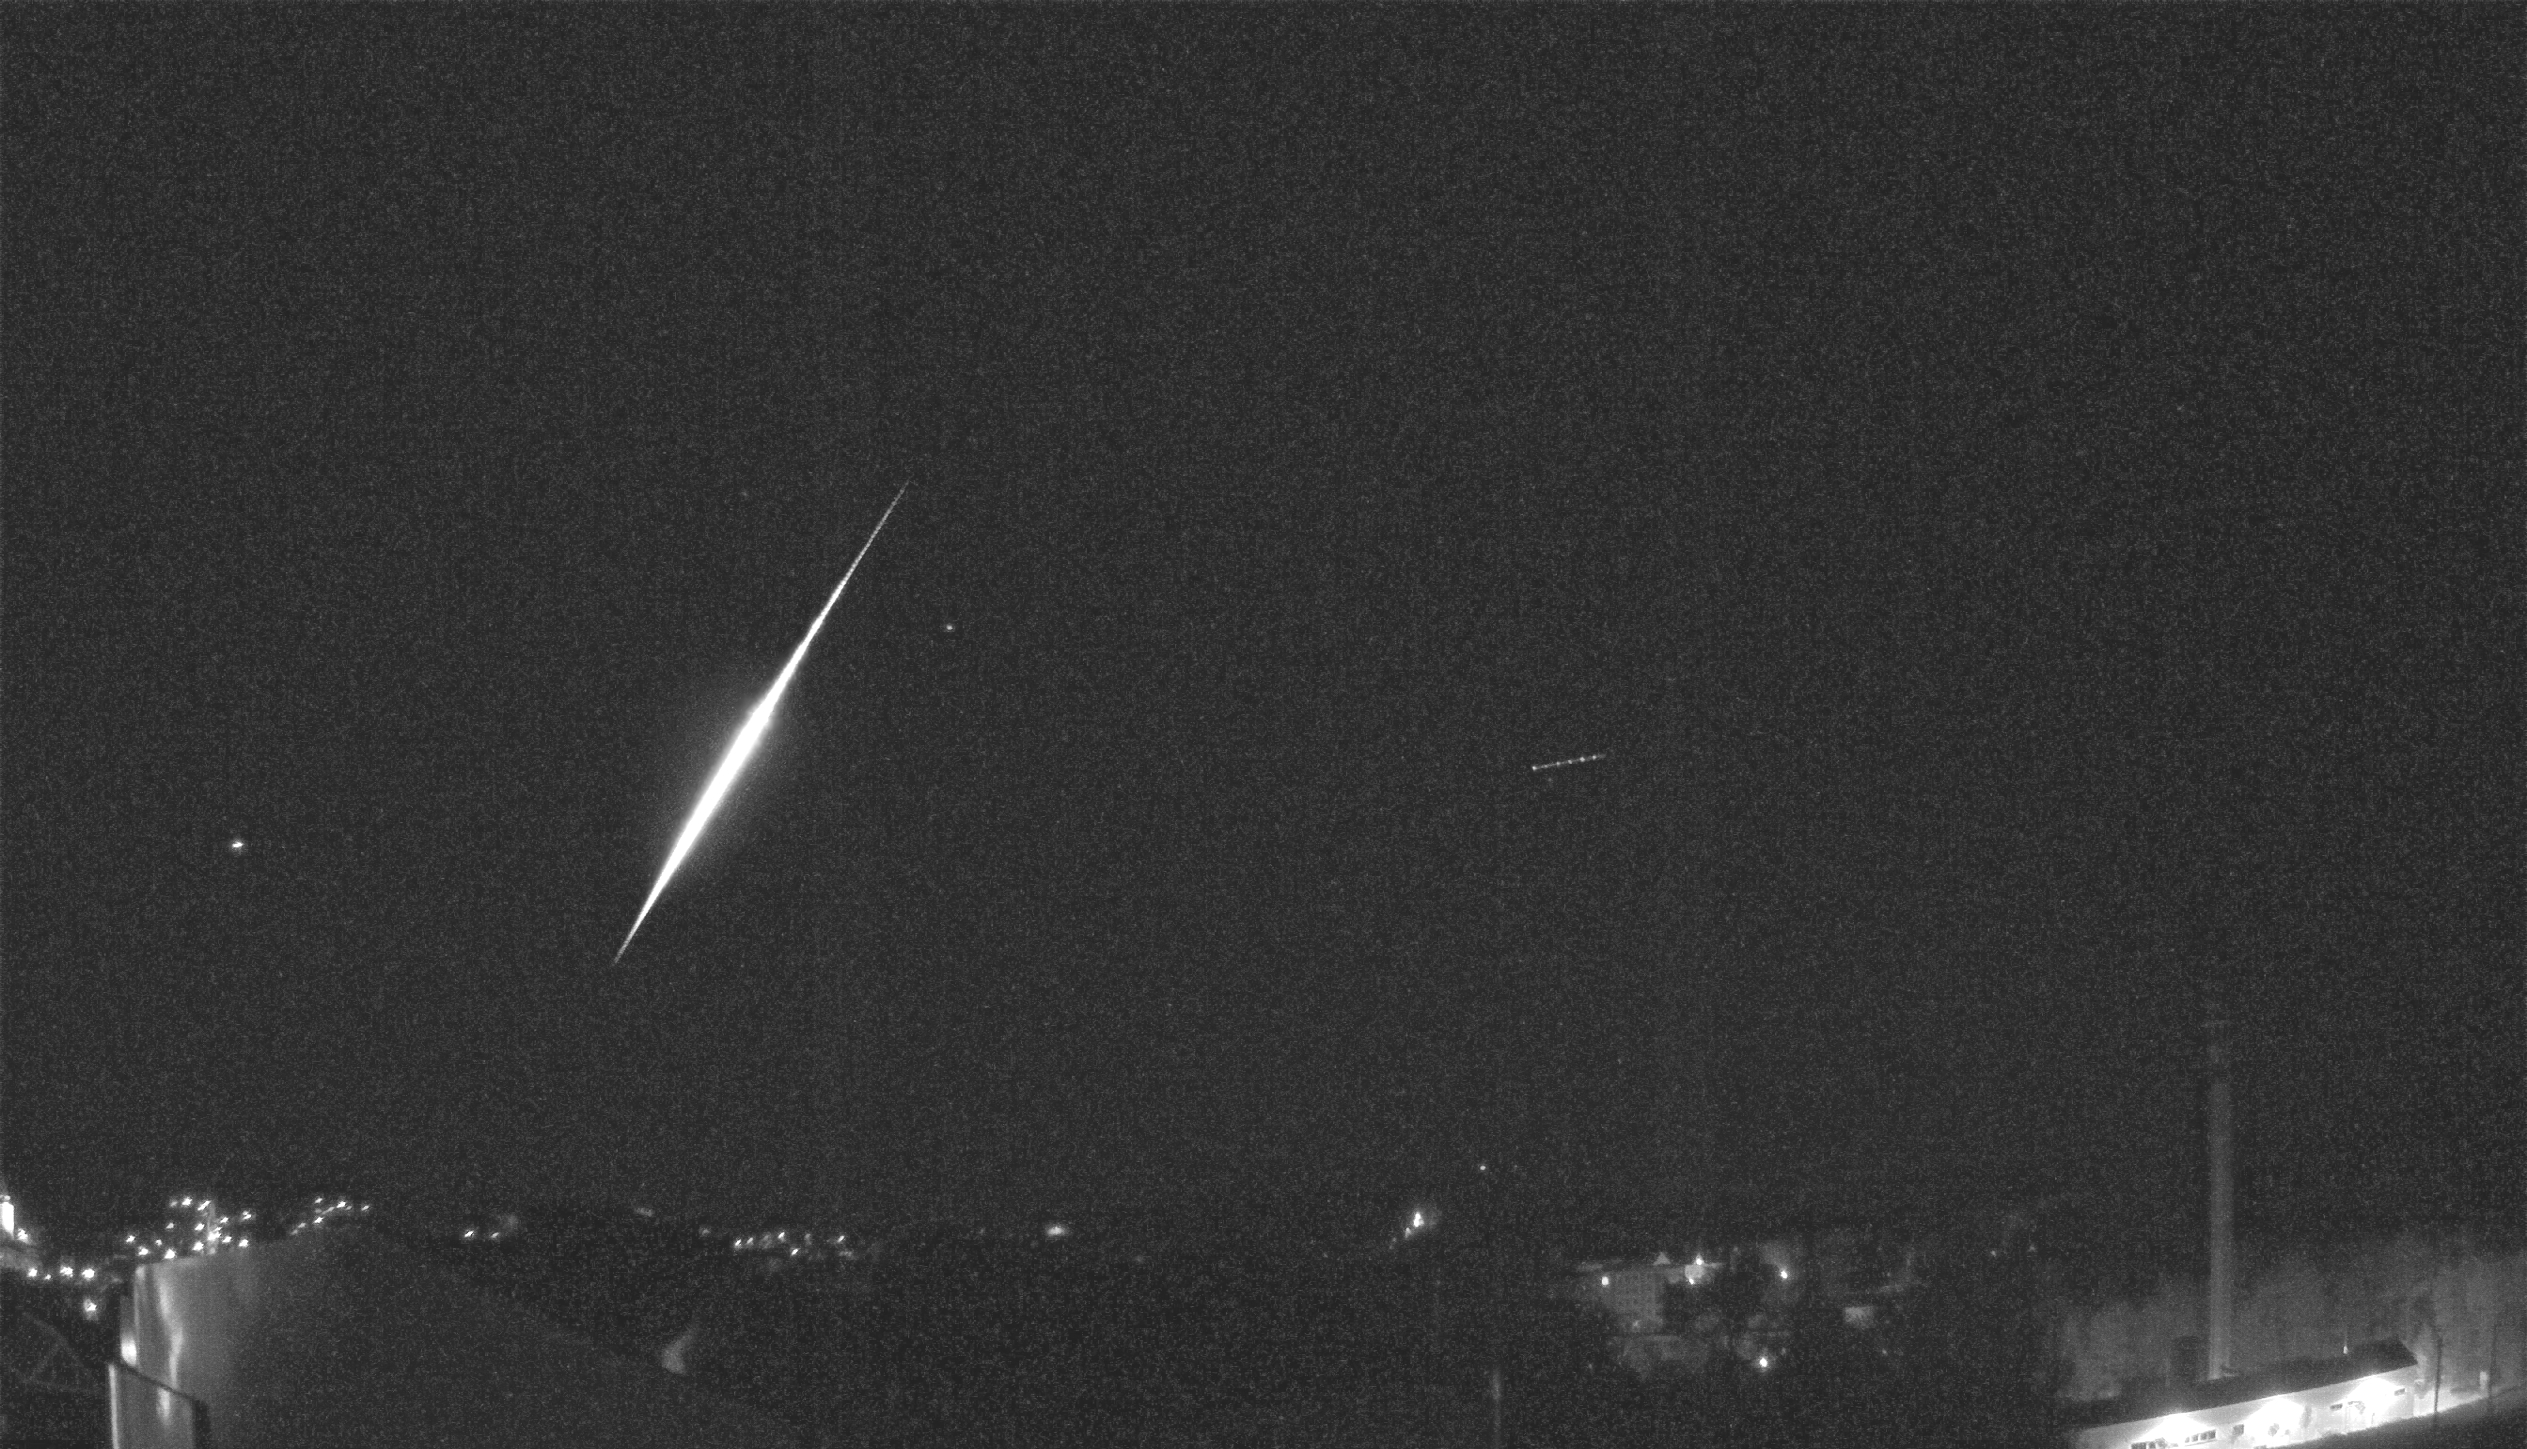 Figure 2
Composite image of the bolide EN120523_211555 from a video taken by the video camera at the Frýdlant station in Bohemia (Credit: Astronomical Institute of the CAS).